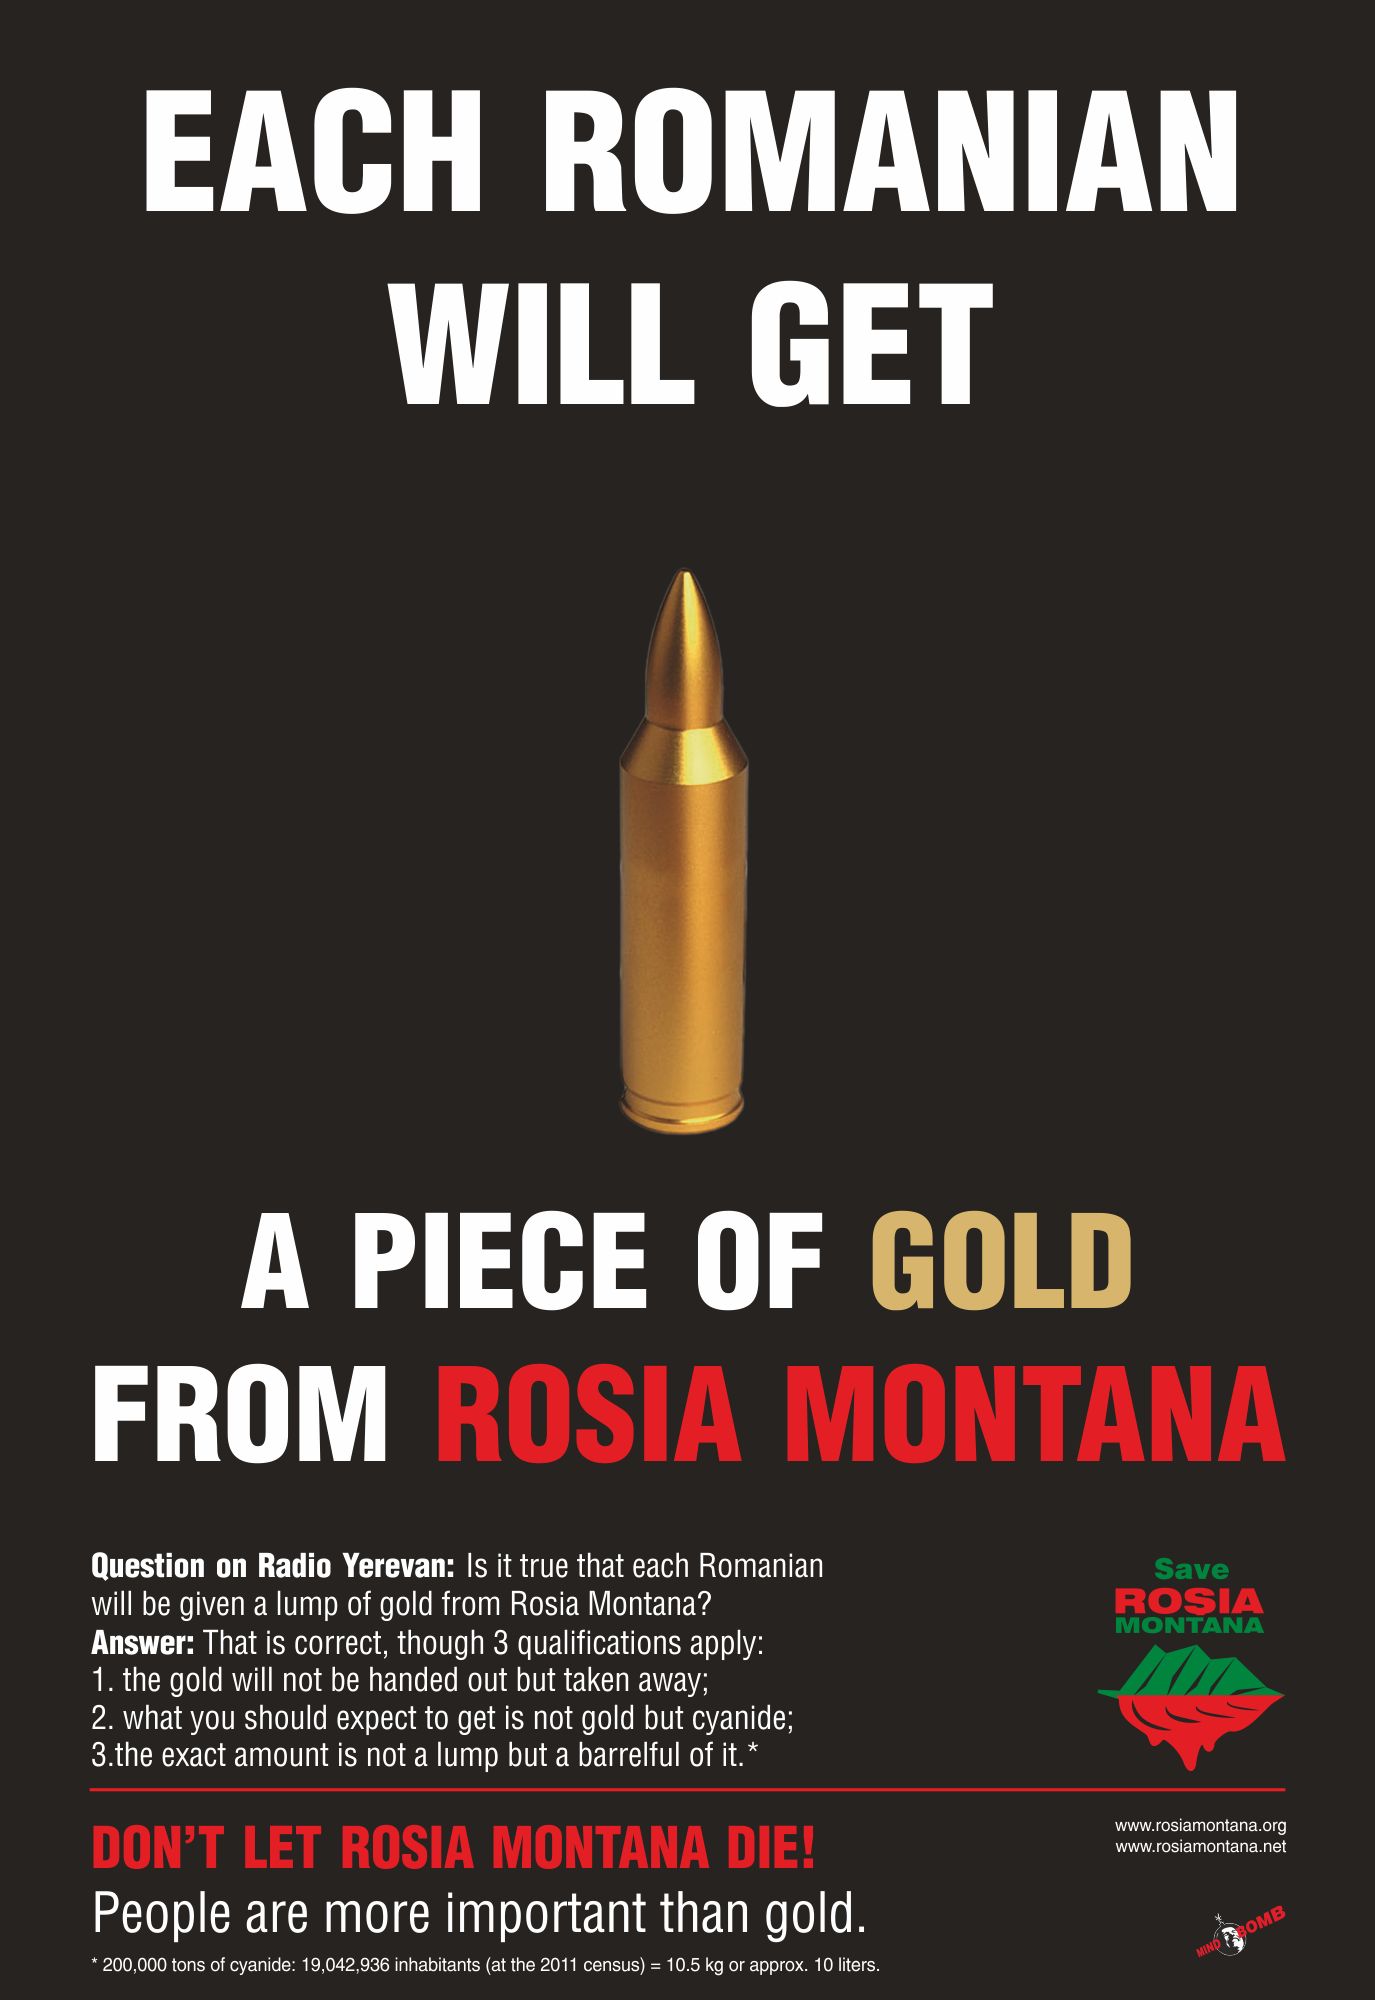 Mindbomb’s latest poster campaign is raising the flag about the very basic but grossly obscured trade-off entailed by the planned gold mine at Rosia Montana through cyanide leaching